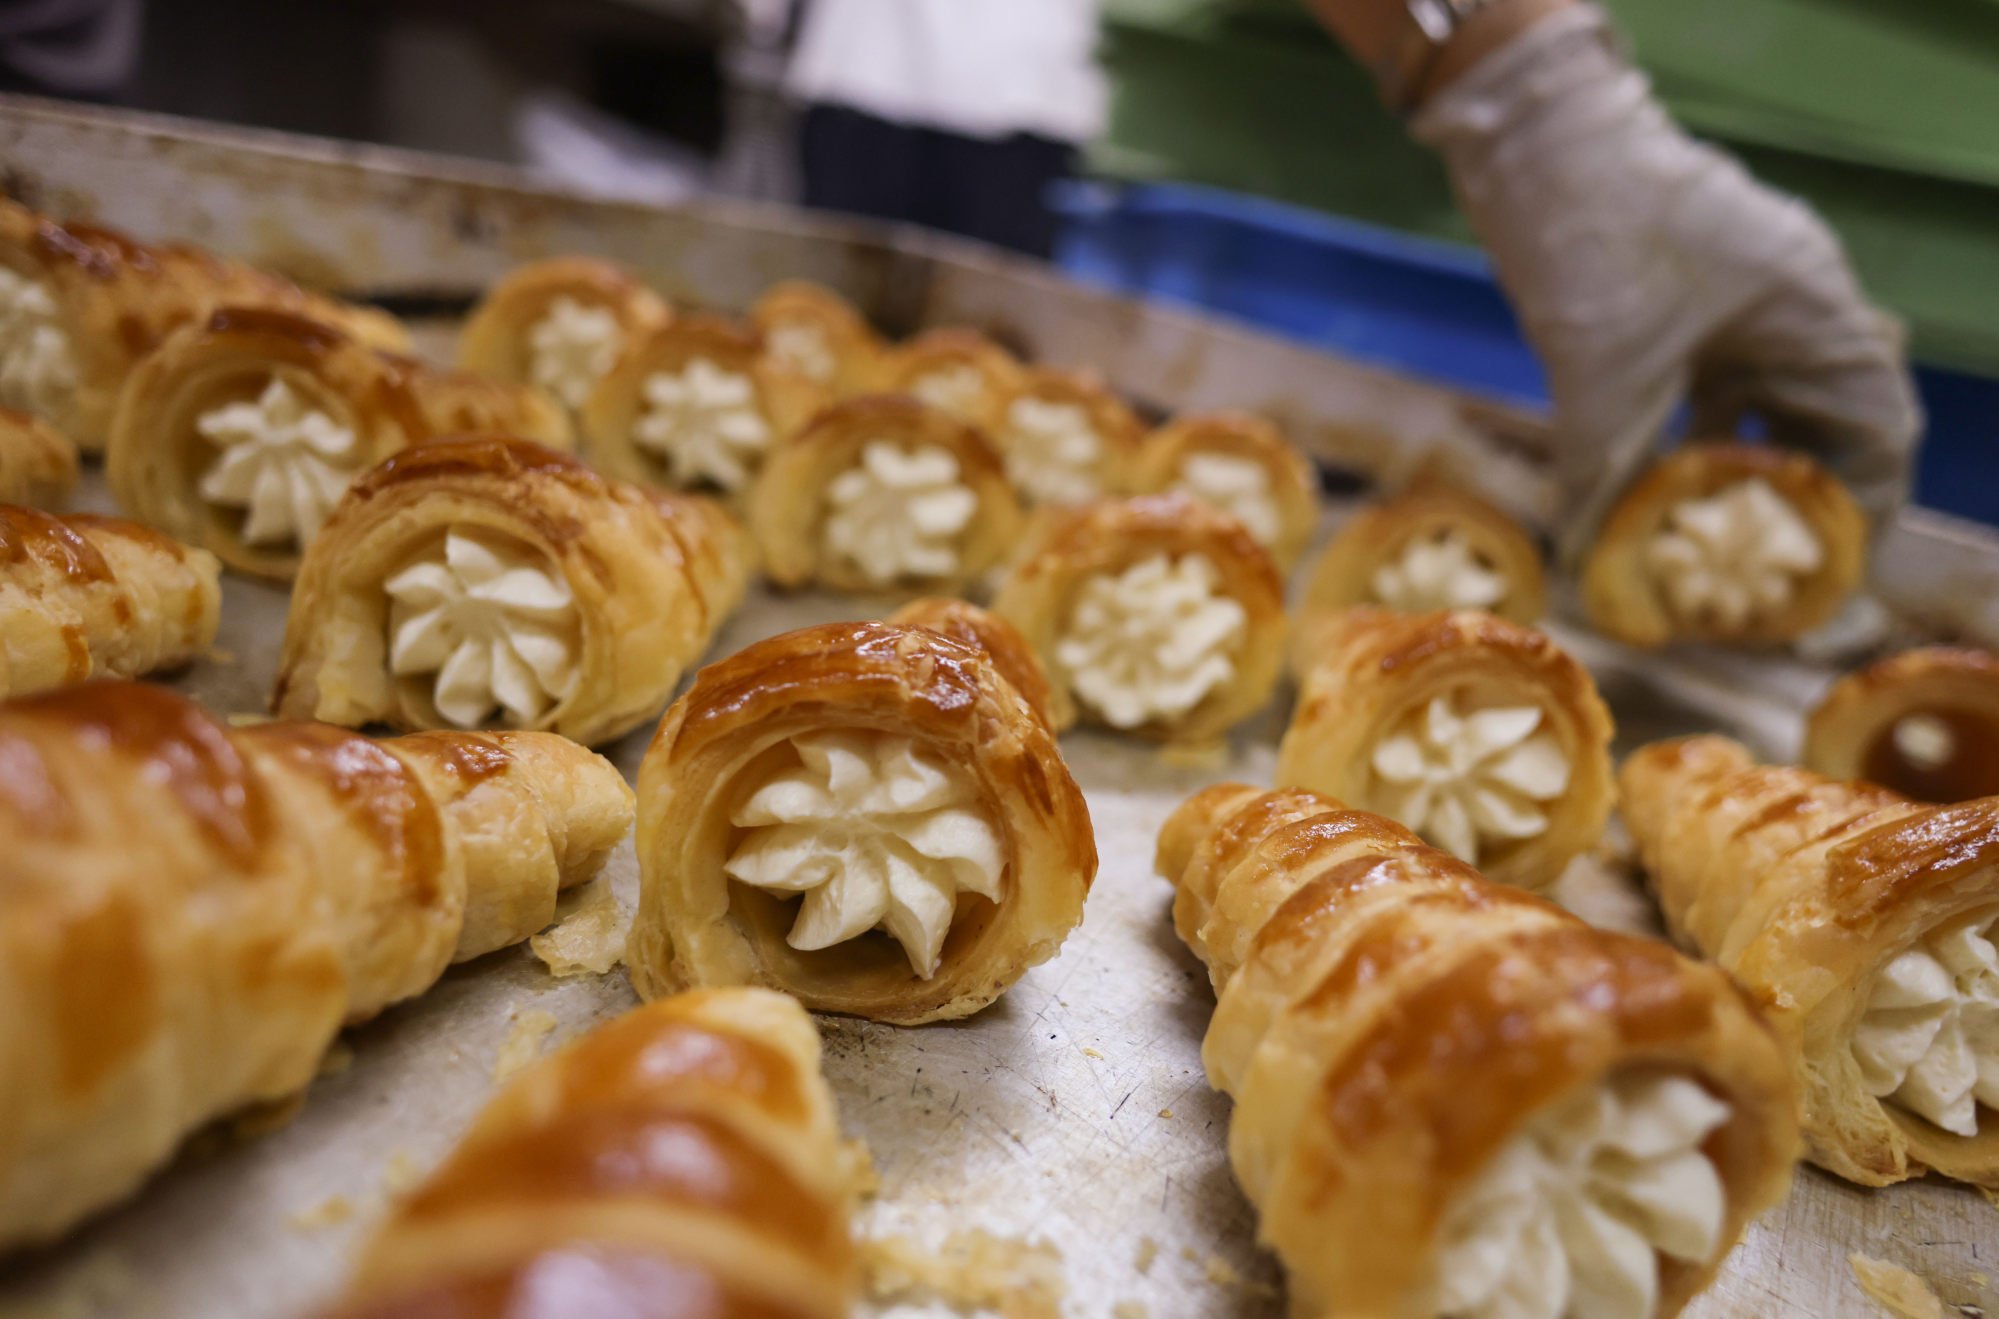 Happy Cake Shop is well-known for its cream puffs and sweet fritters. Photo: Dickson Lee